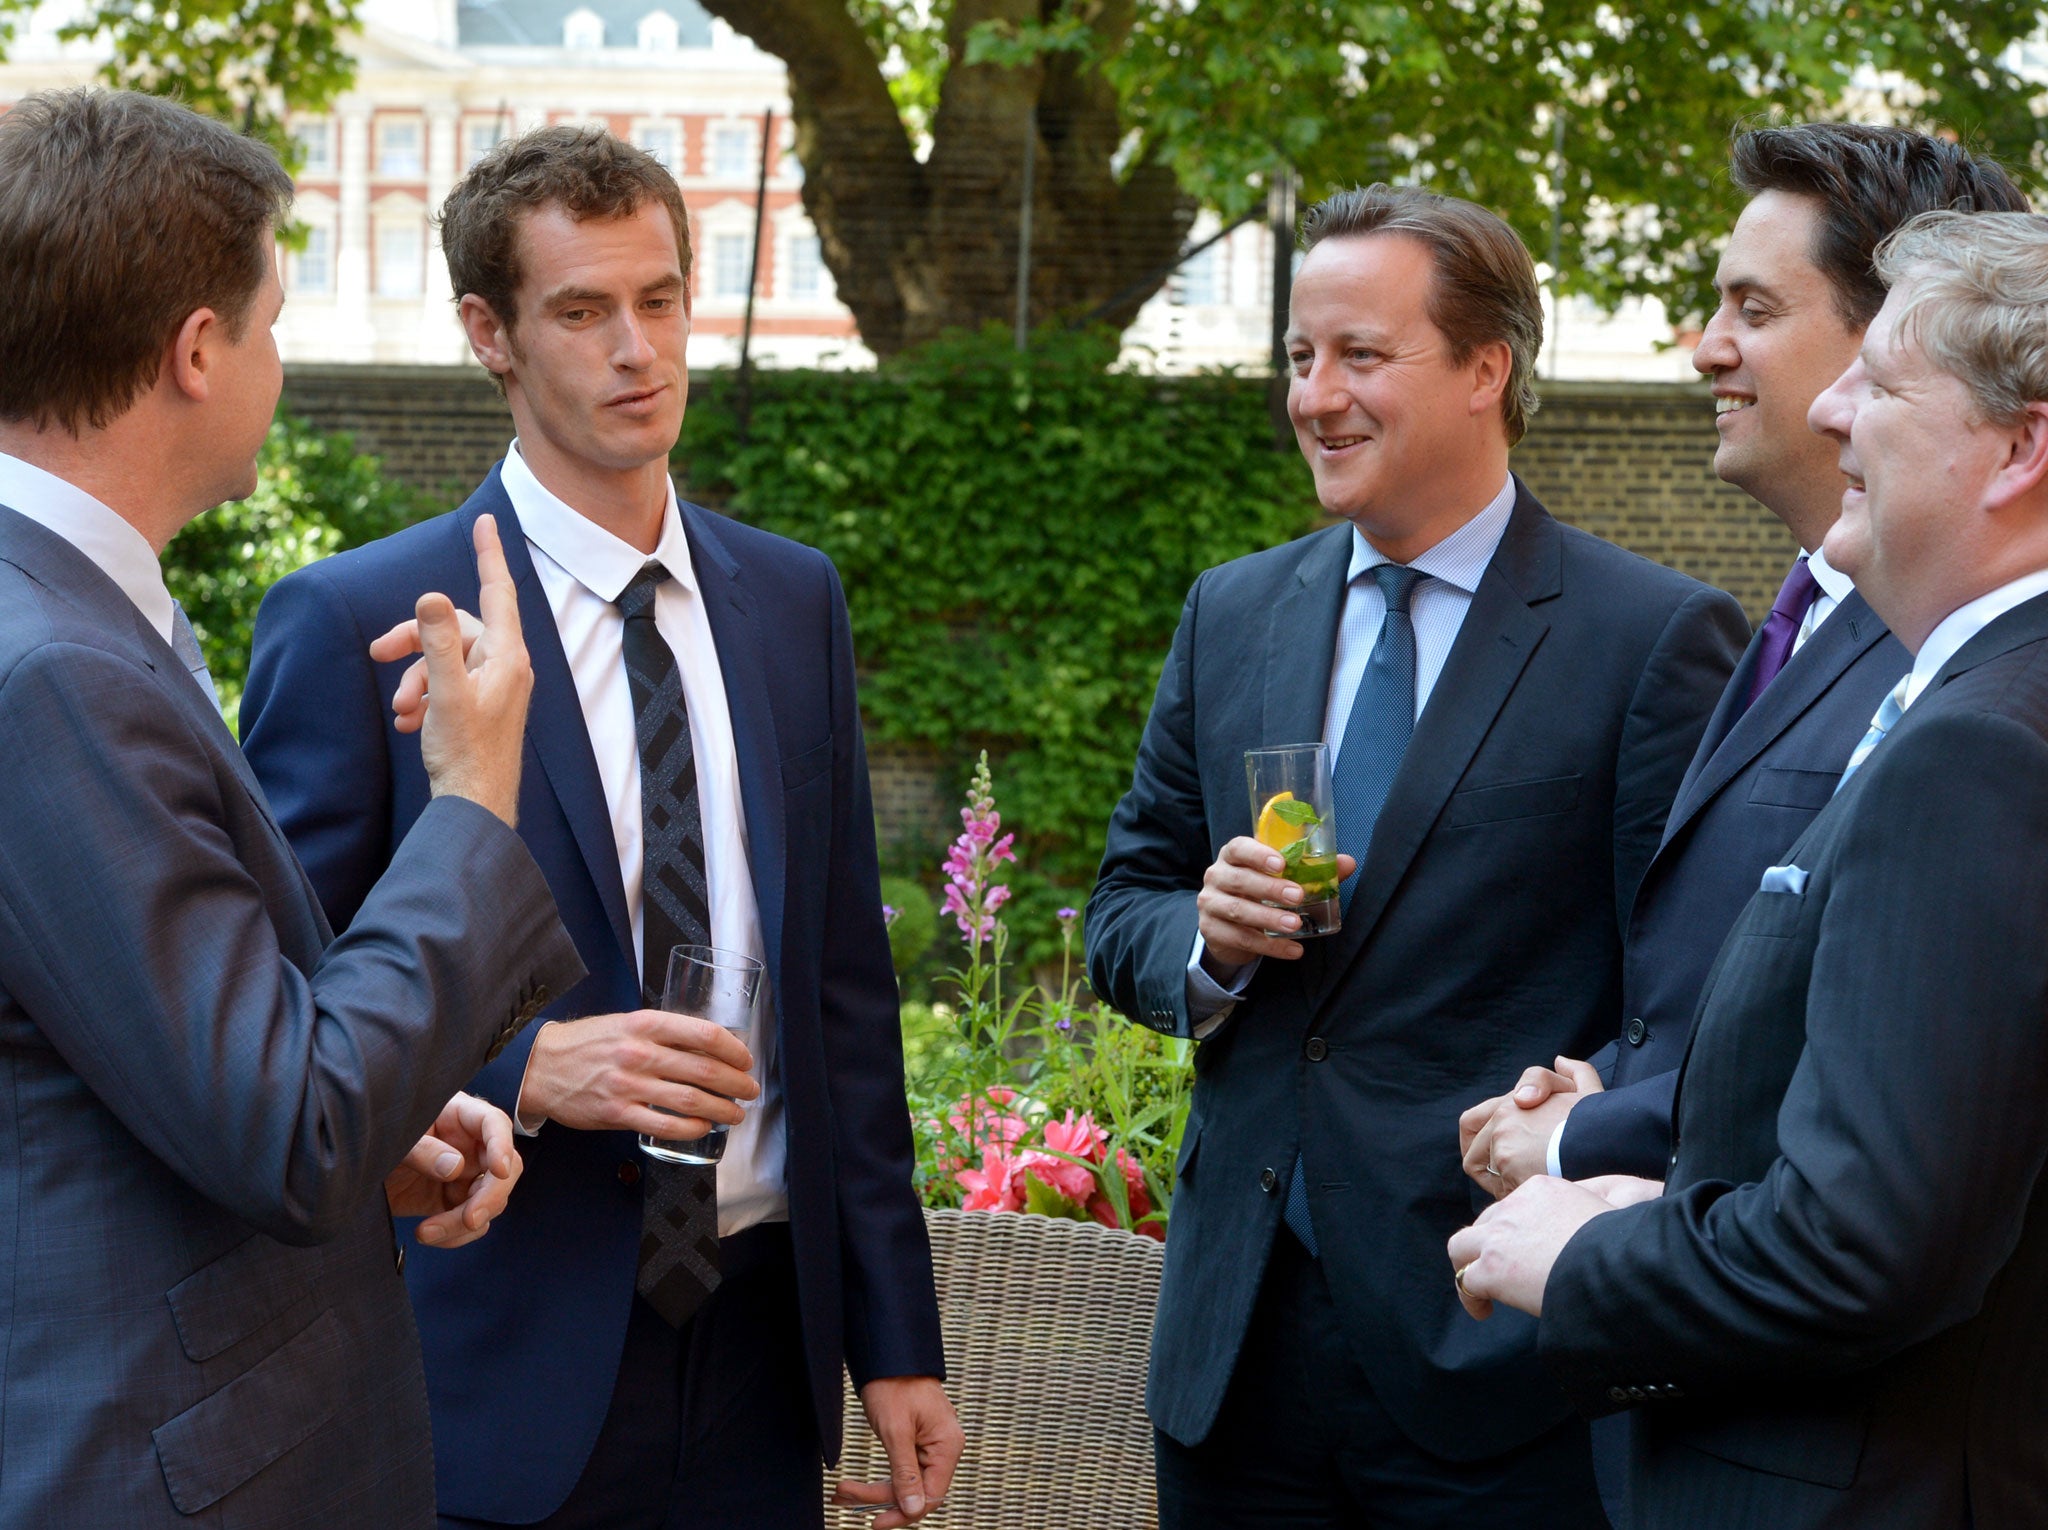 Andy Murray joins (L-R) Deputy Prime Minister Nick Clegg, Prime Minister David Cameron, Labor leader Ed Miliband and SNP Westminster leader Angus Robinson during a cross-party reception in the garden of Downing Street on July 8, 2013 in London, England.